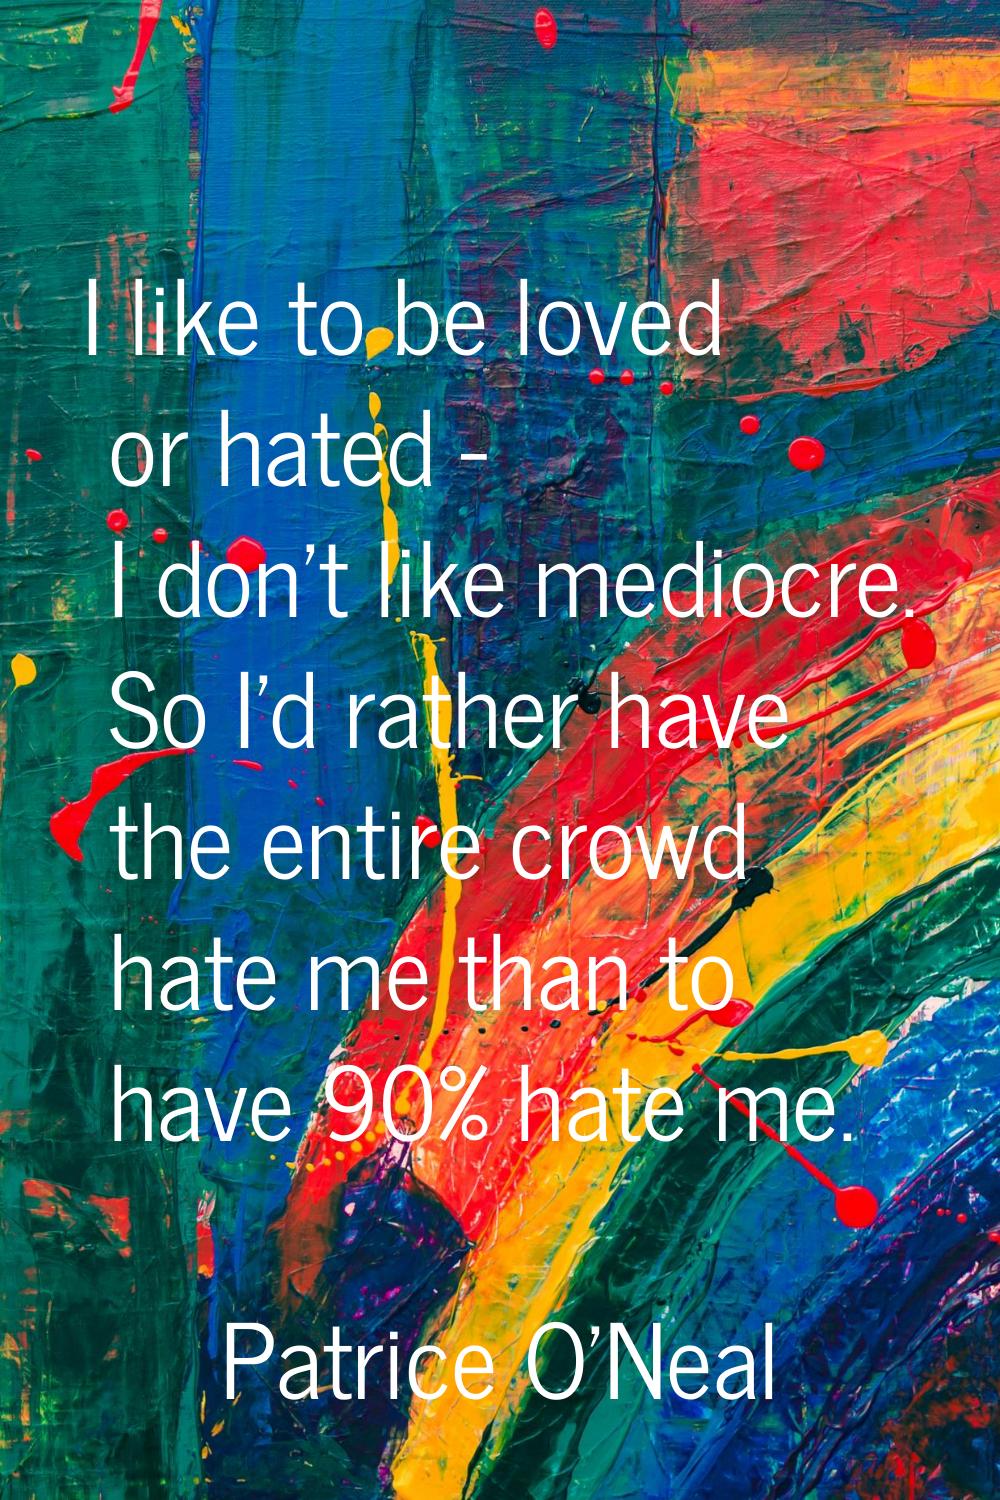 I like to be loved or hated - I don't like mediocre. So I'd rather have the entire crowd hate me th